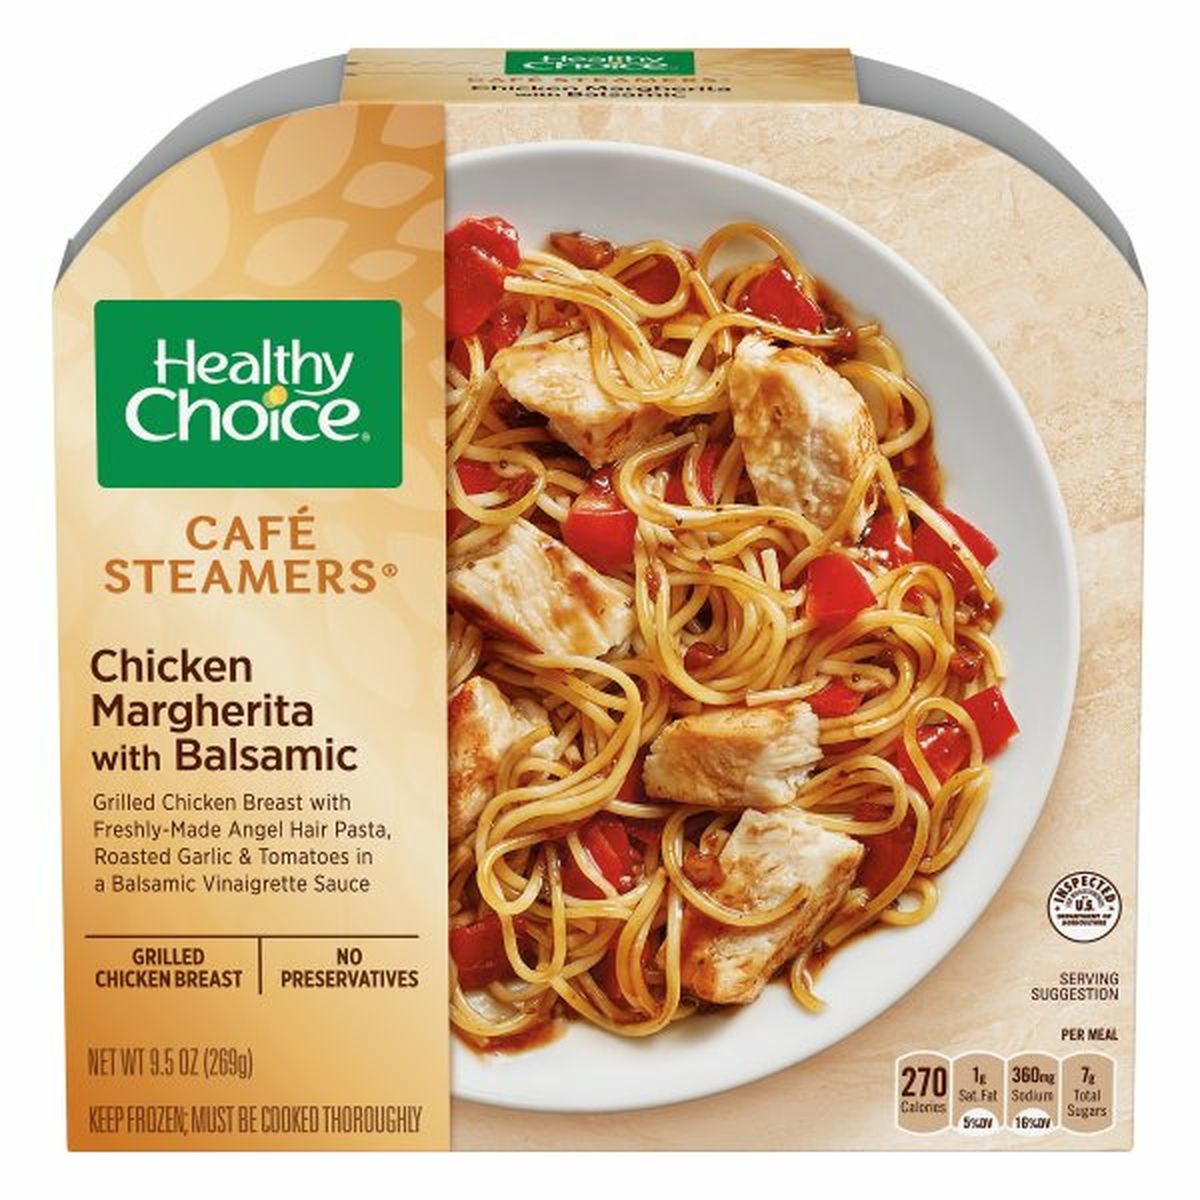 Calories in Healthy Choice Cafe Steamers Chicken Margherita with Balsamic